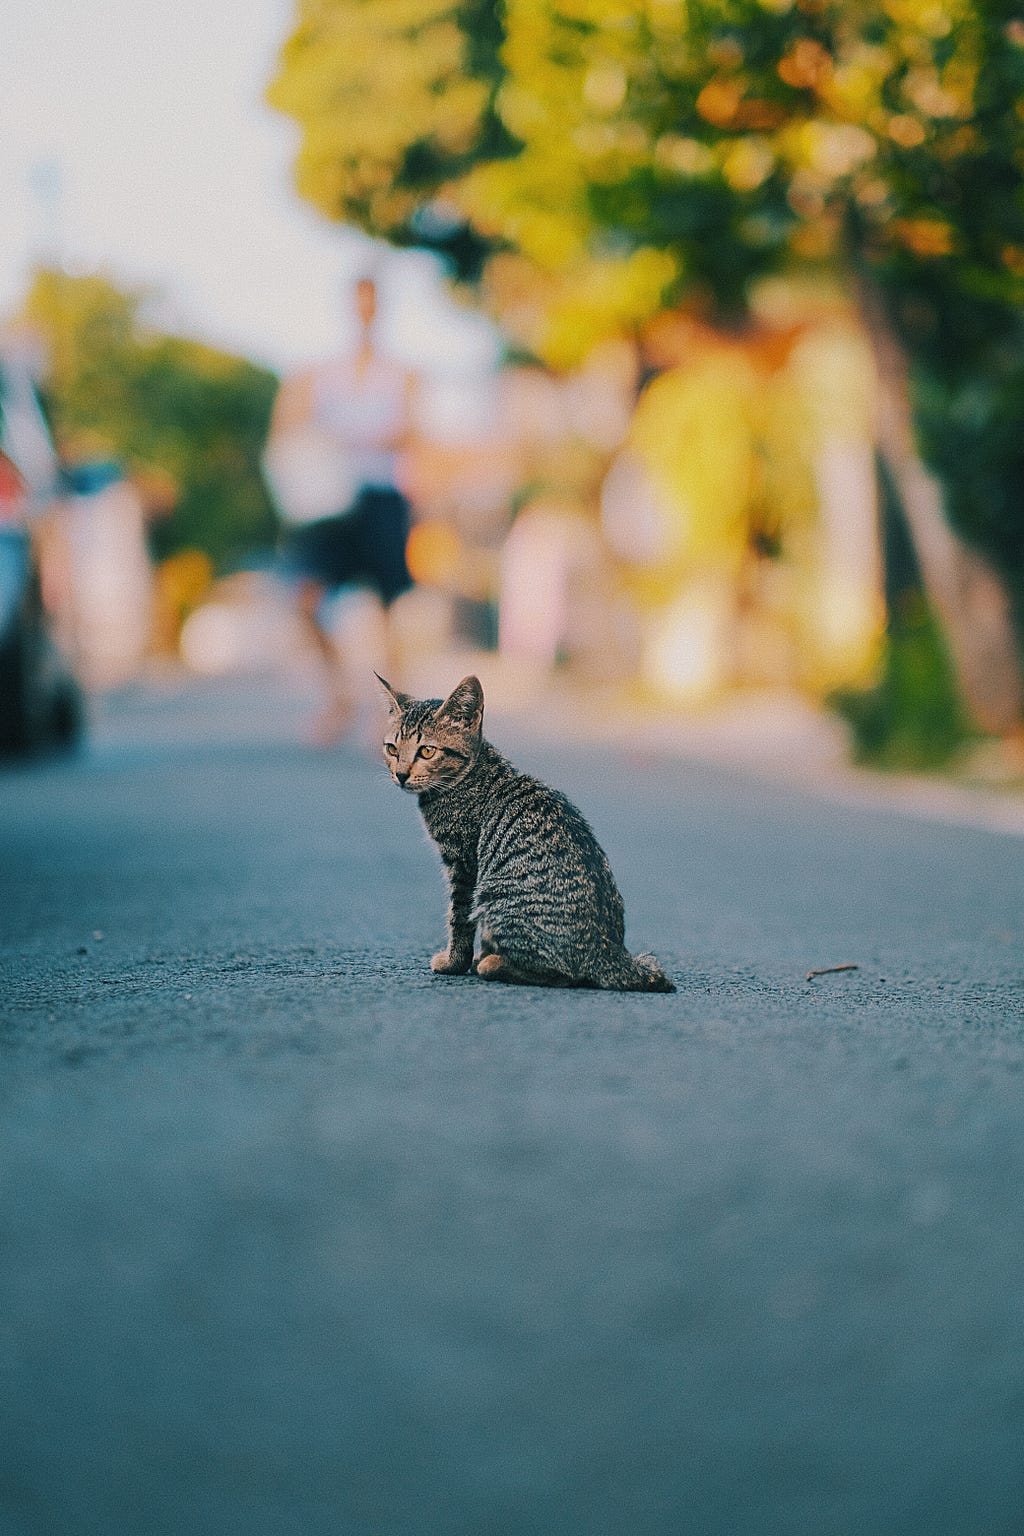 A small cat with grey fur sits on an asphalt sidewalk with a blurred daytime background